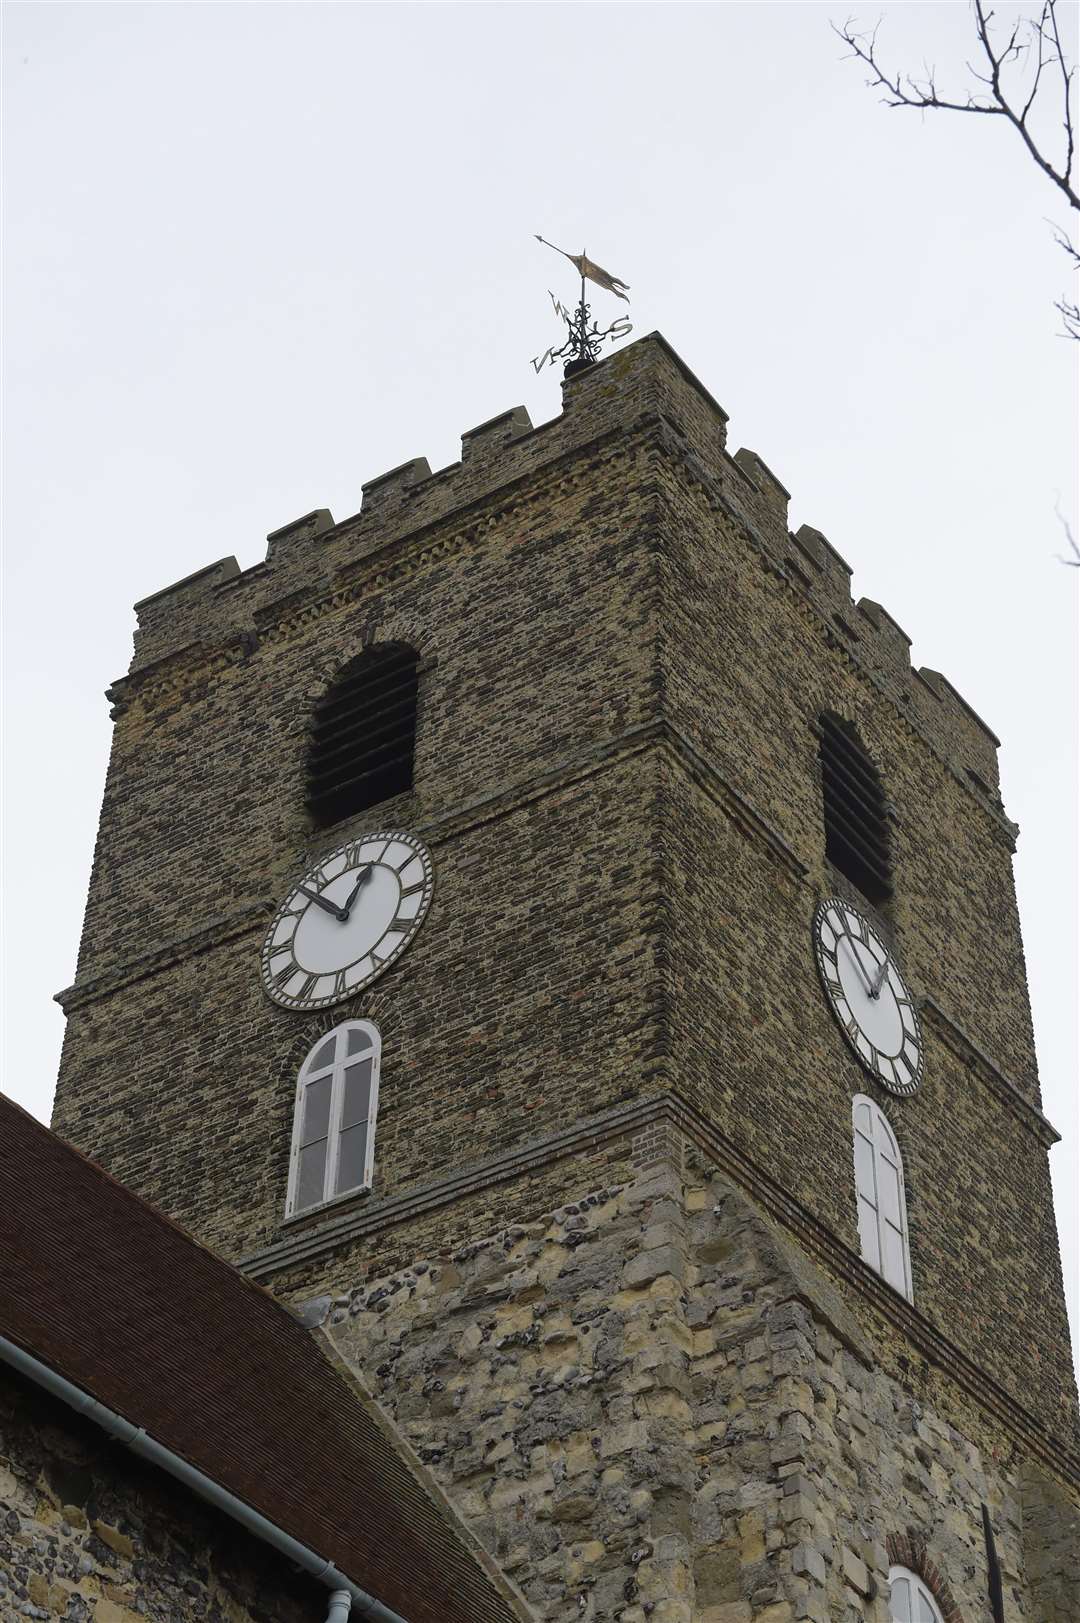 The clock at St. Peter’s Church in Sandwich must be silenced at night